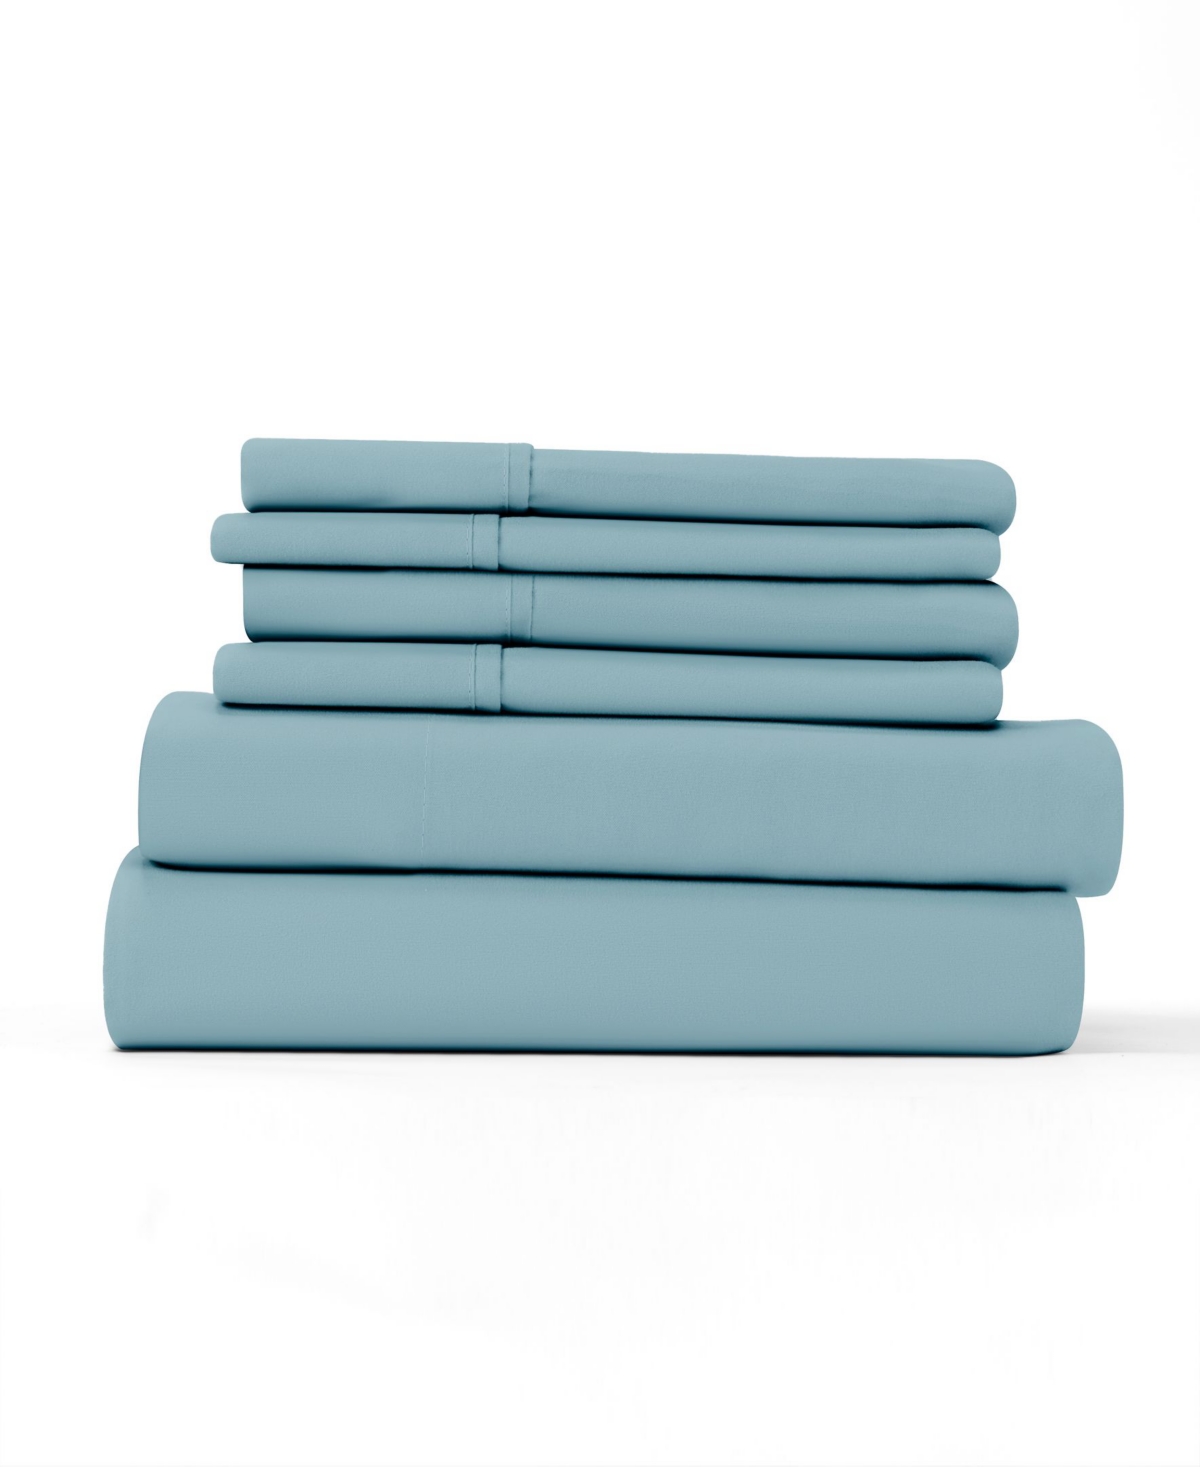 Ienjoy Home Solids In Style By The Home Collection 4 Piece Bed Sheet Set, Twin Xl Bedding In Ocean